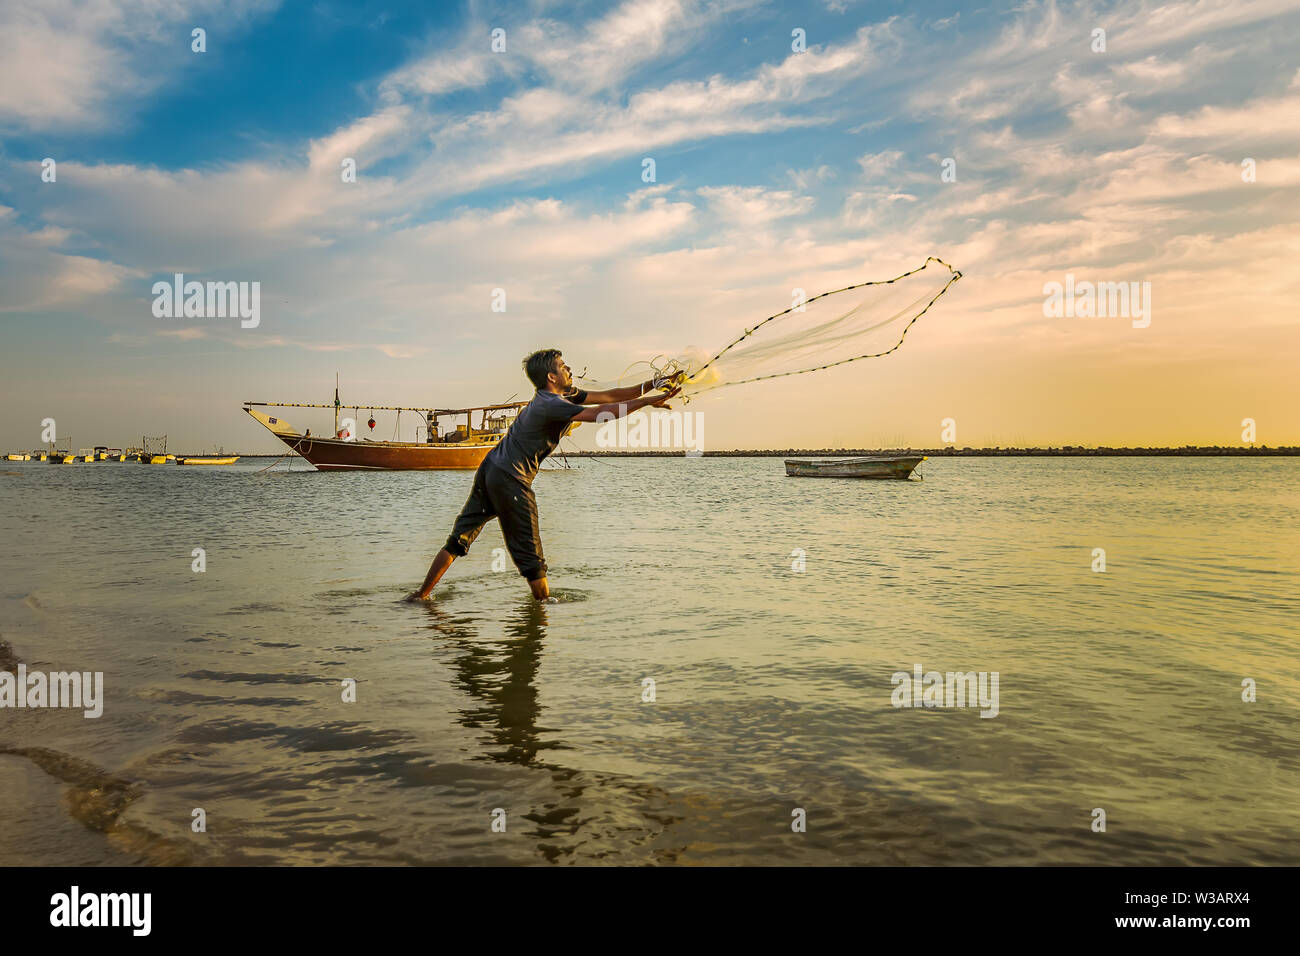 Silhouettes of the fishermen throwing fishing net during sunset in